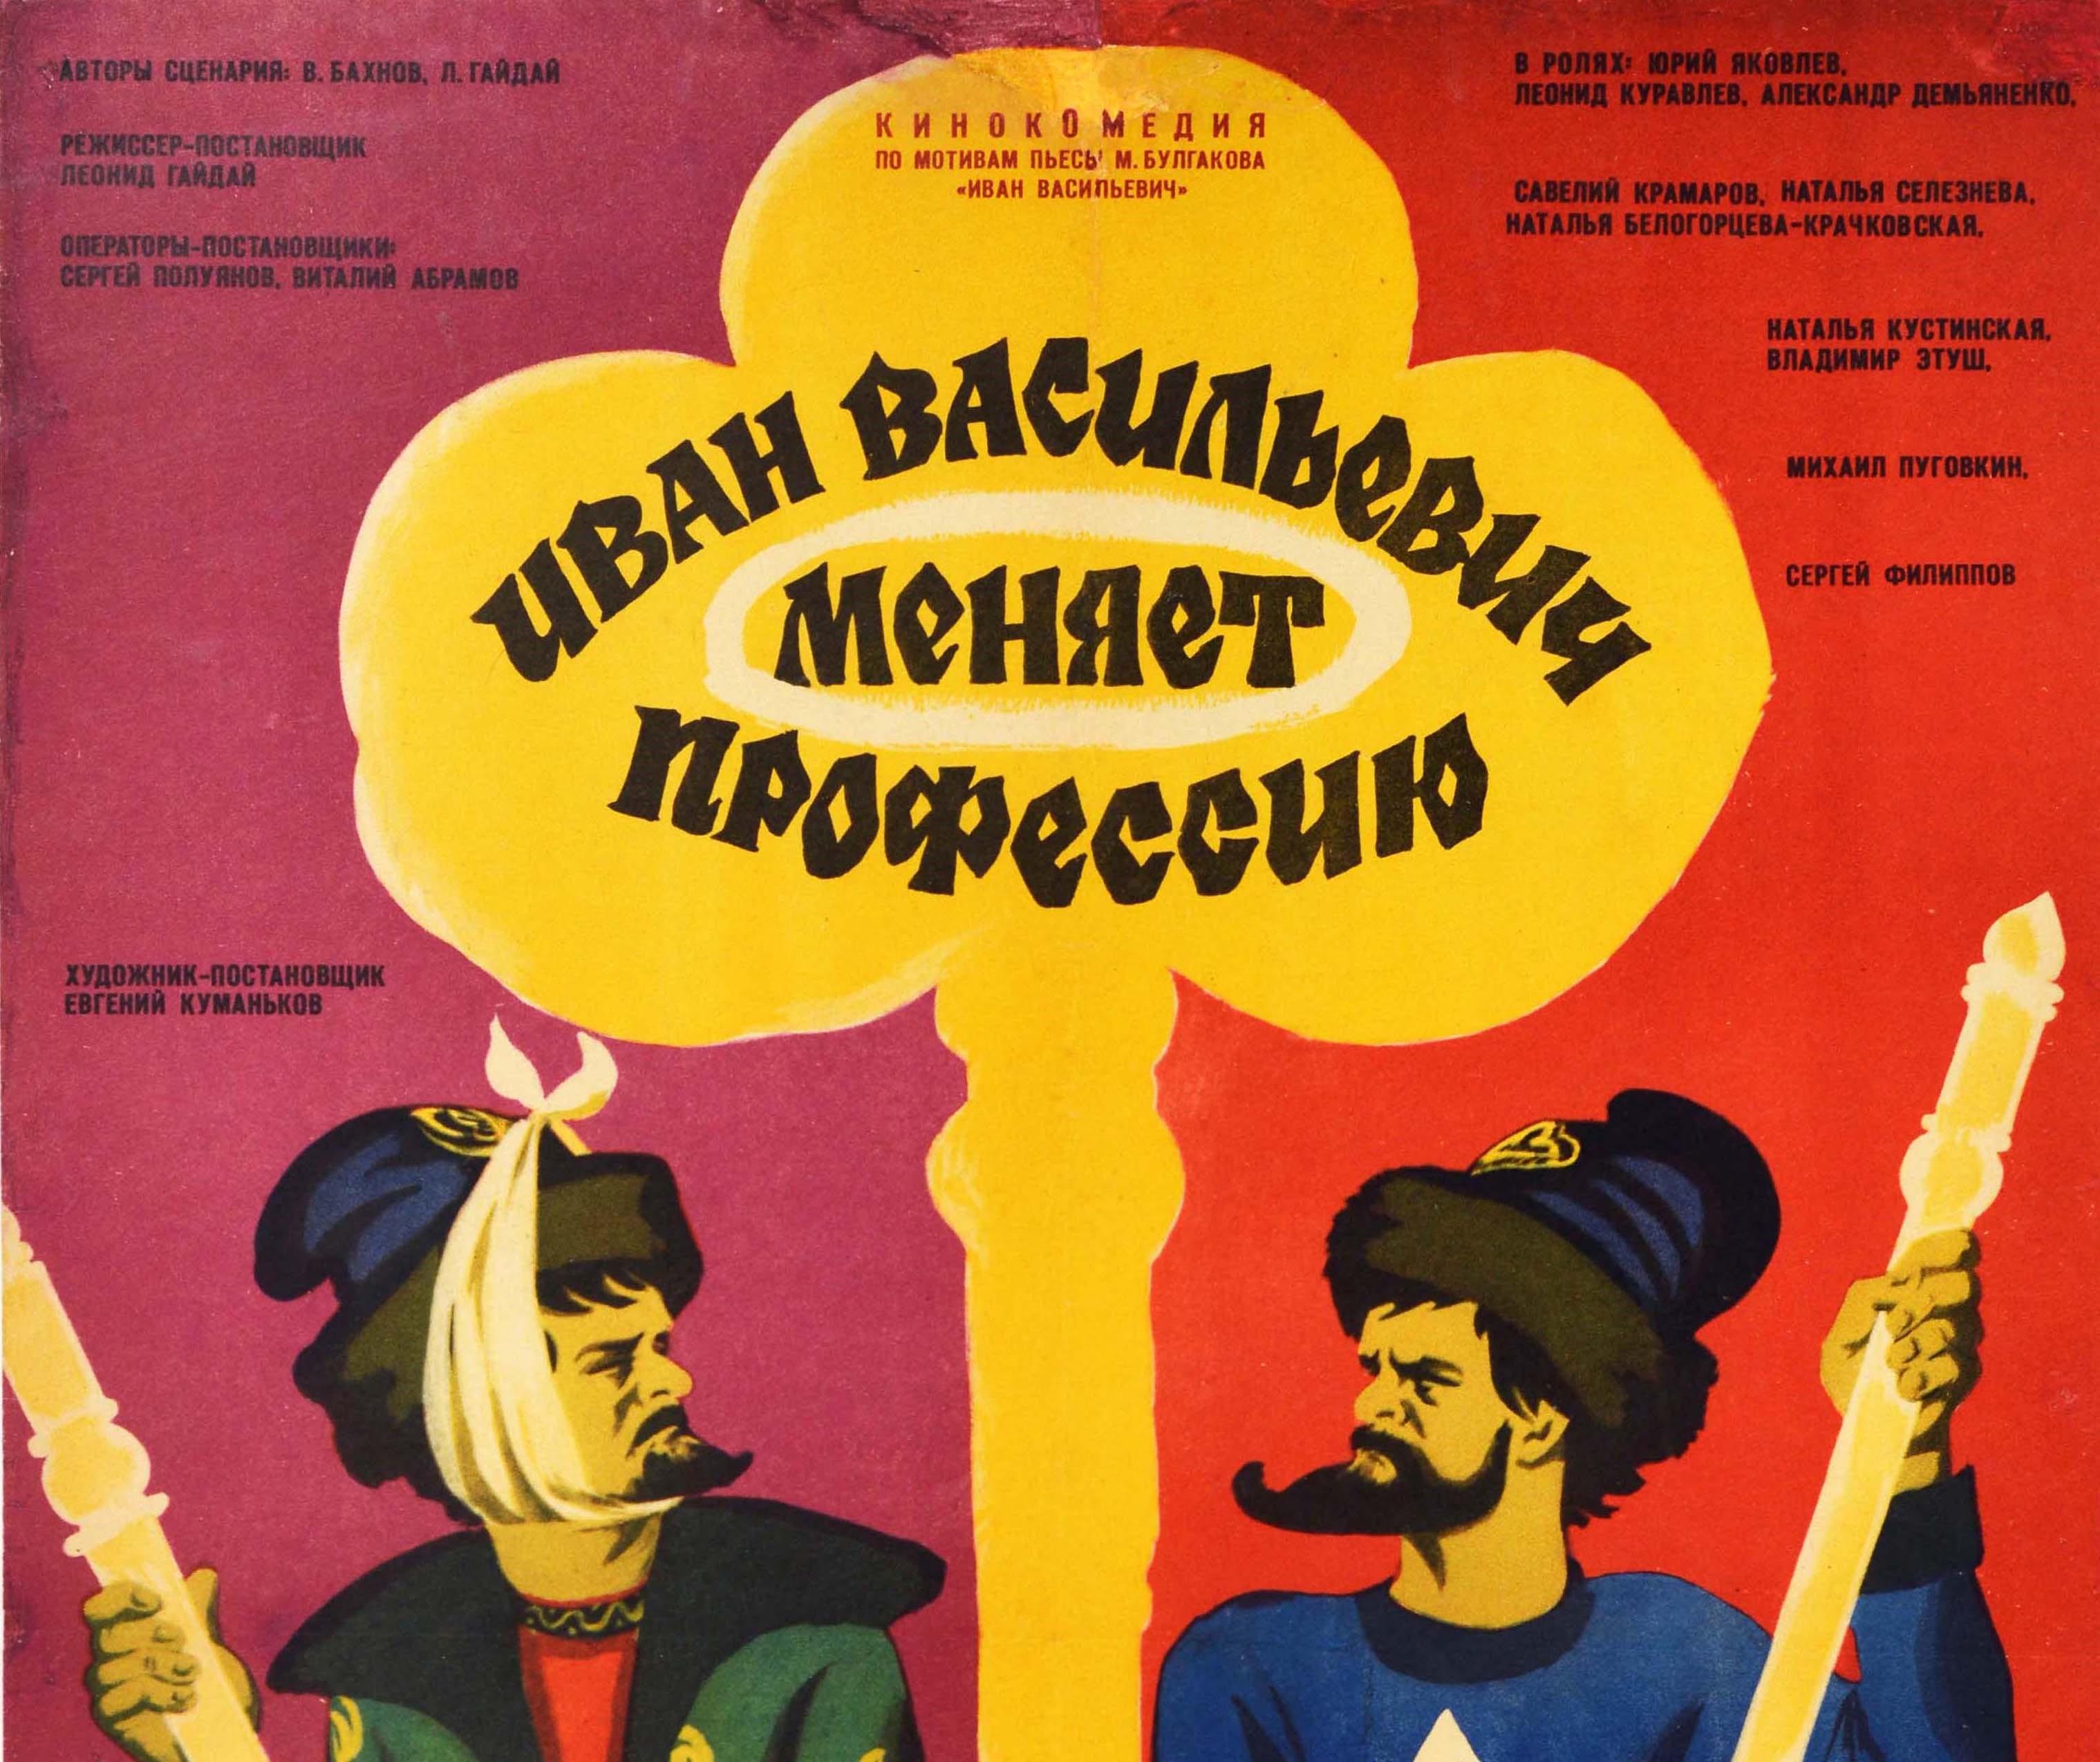 Original vintage Soviet movie poster for a Russian comedy action film Ivan Vasilievich Changes Occupation / ???? ?????????? ?????? ????????? (Ivan Vasilevich Menyaet Professiyu / Ivan the Terrible: Back to the Future) directed by Leonid Gaidai and